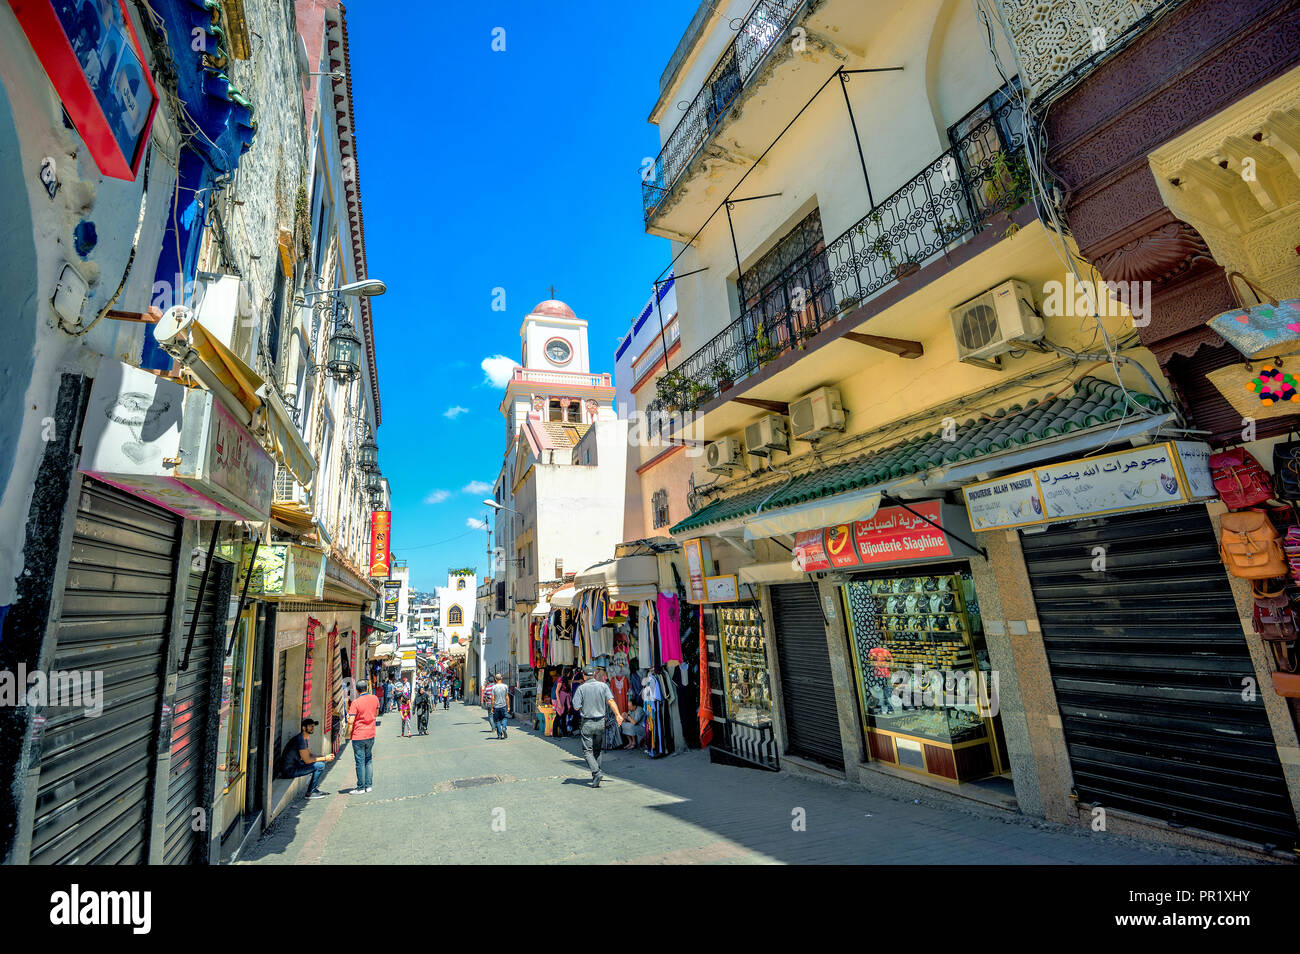 Shopping street in medina with view of mosque at old town Tangier. Morocco, North Africa Stock Photo